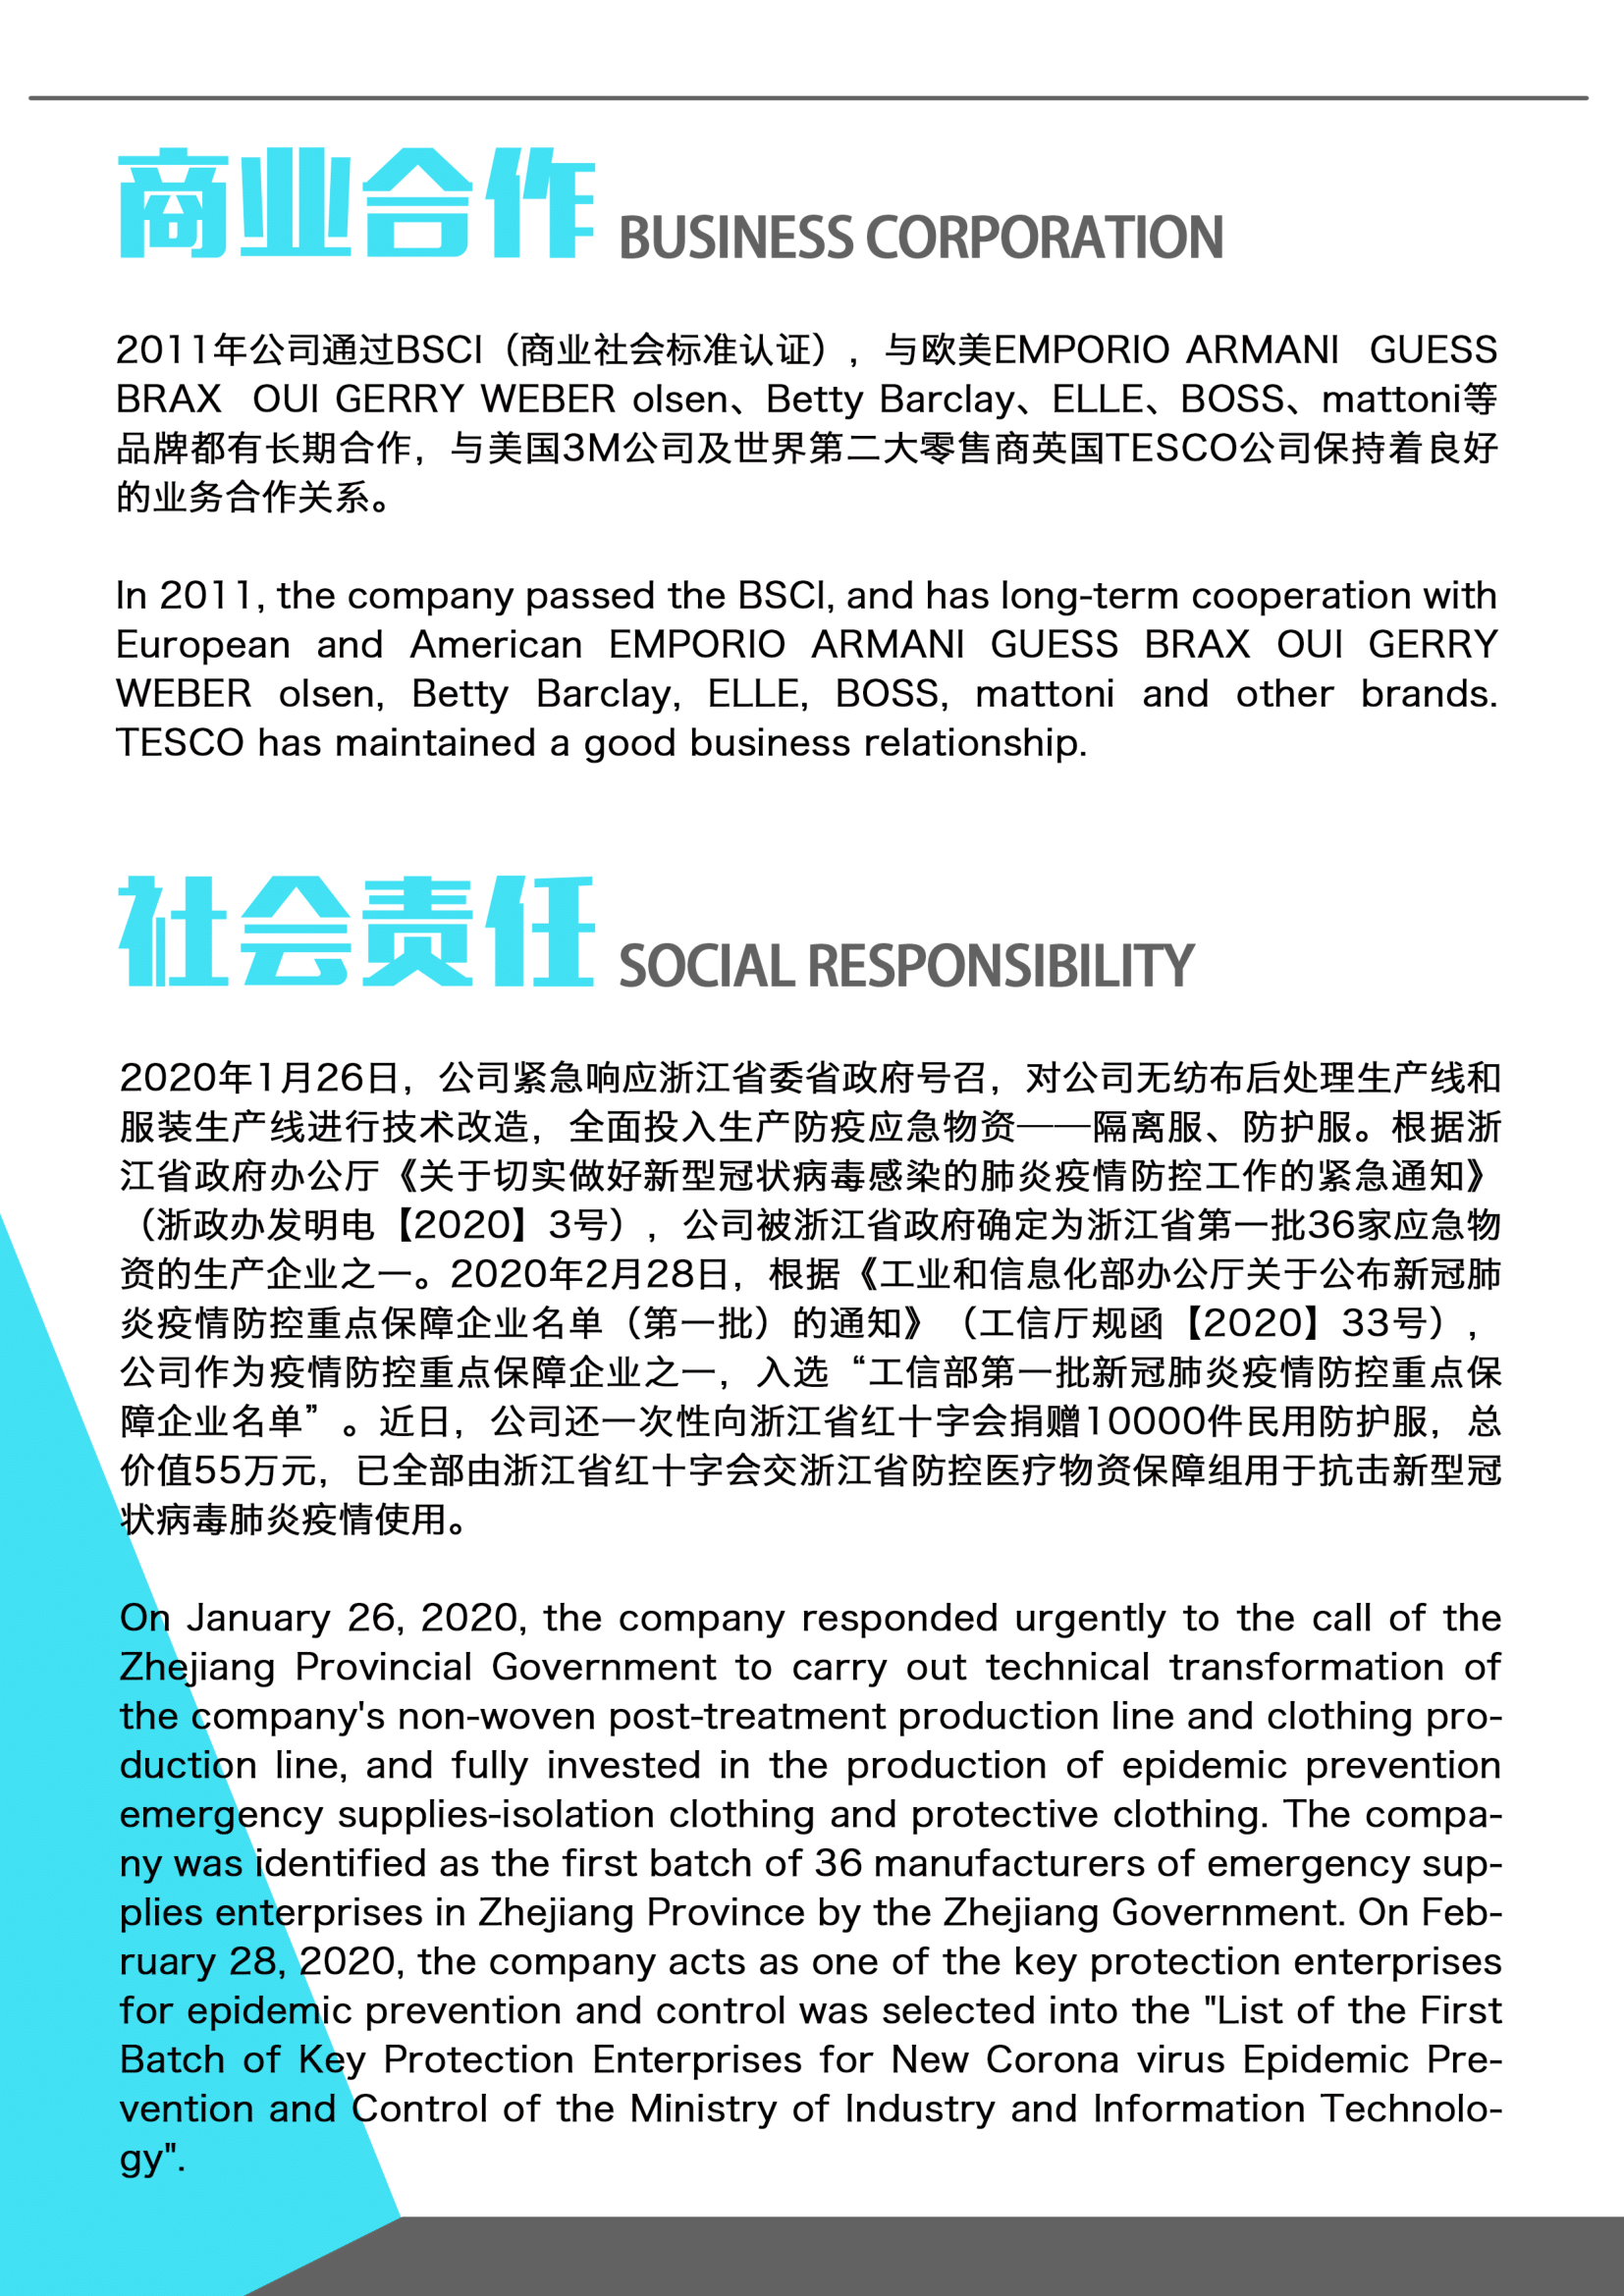 Introduction of Lovely Co., Ltd(1)-04.png